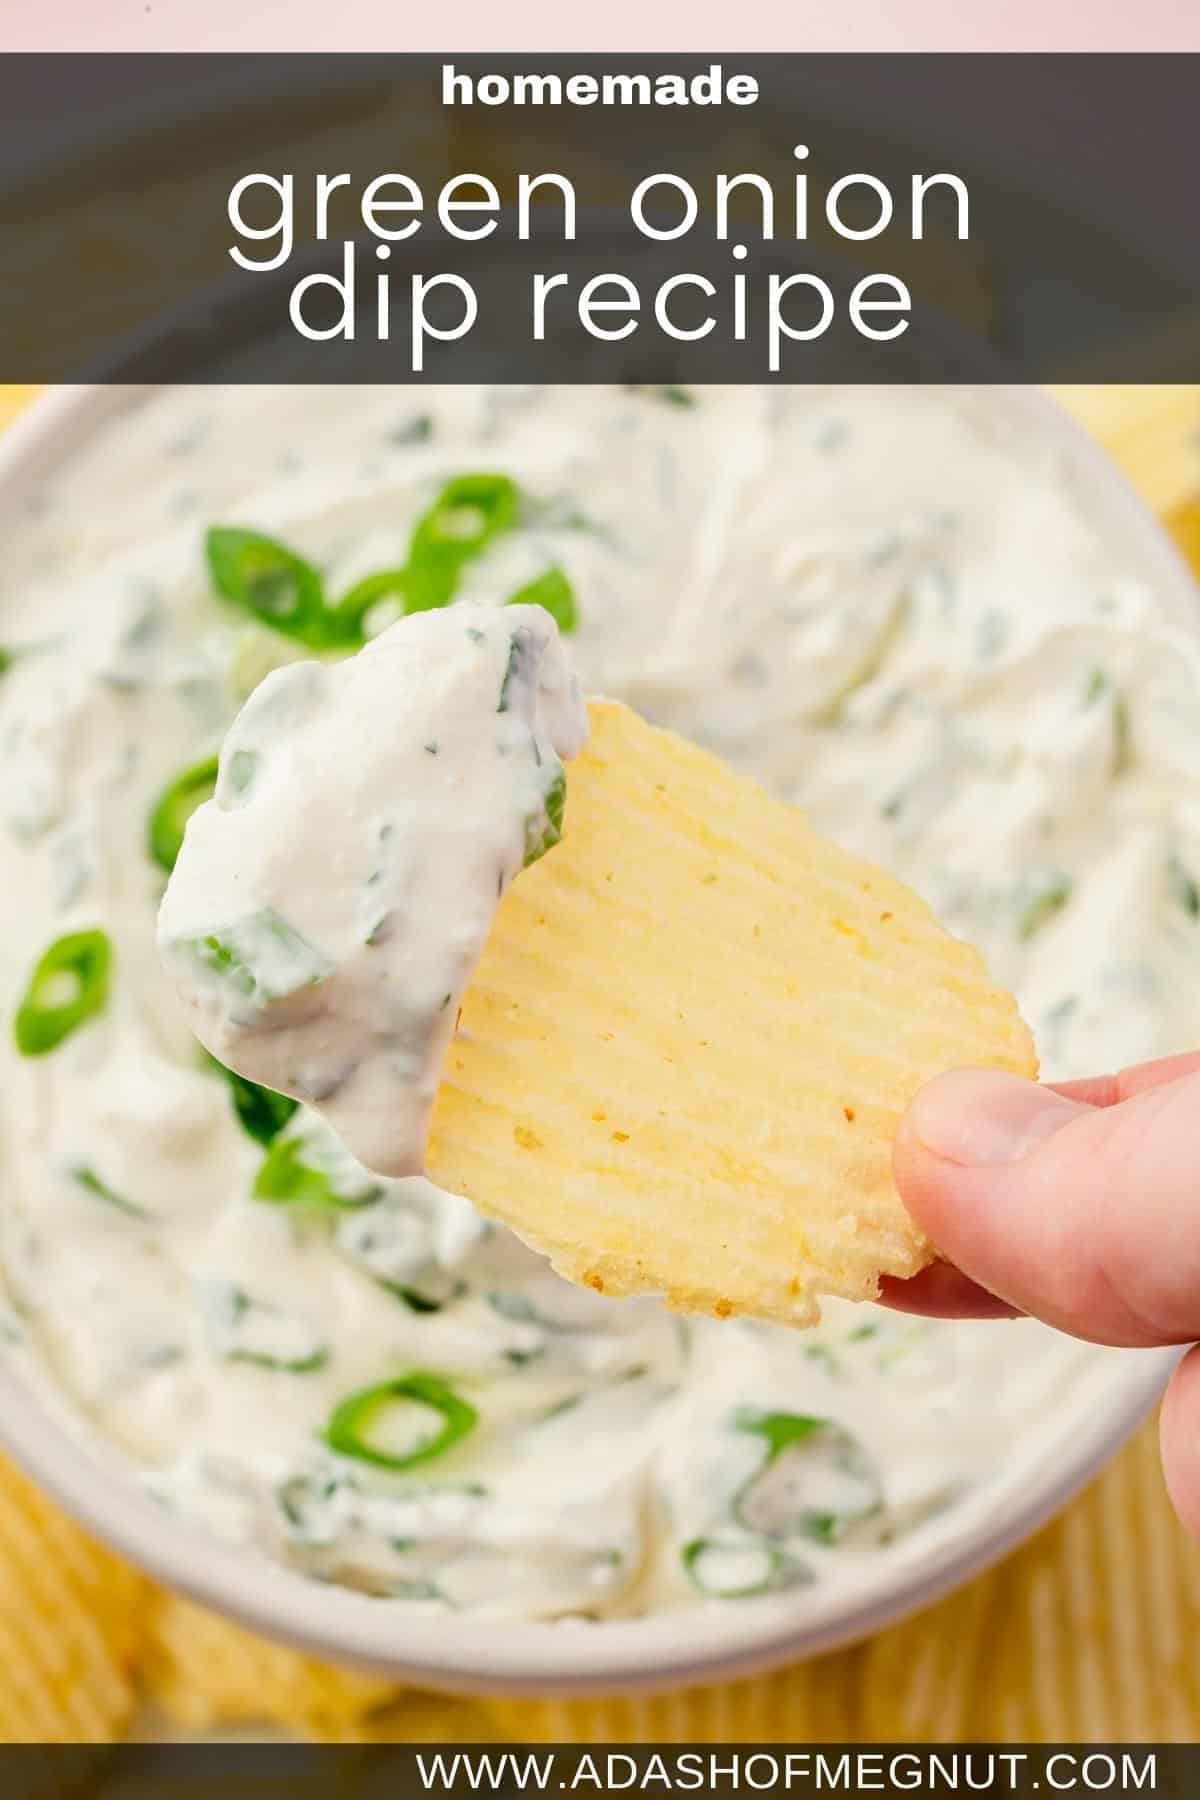 A hand holding a potato chip dipped into green onion dip over a larger bowl of dip.